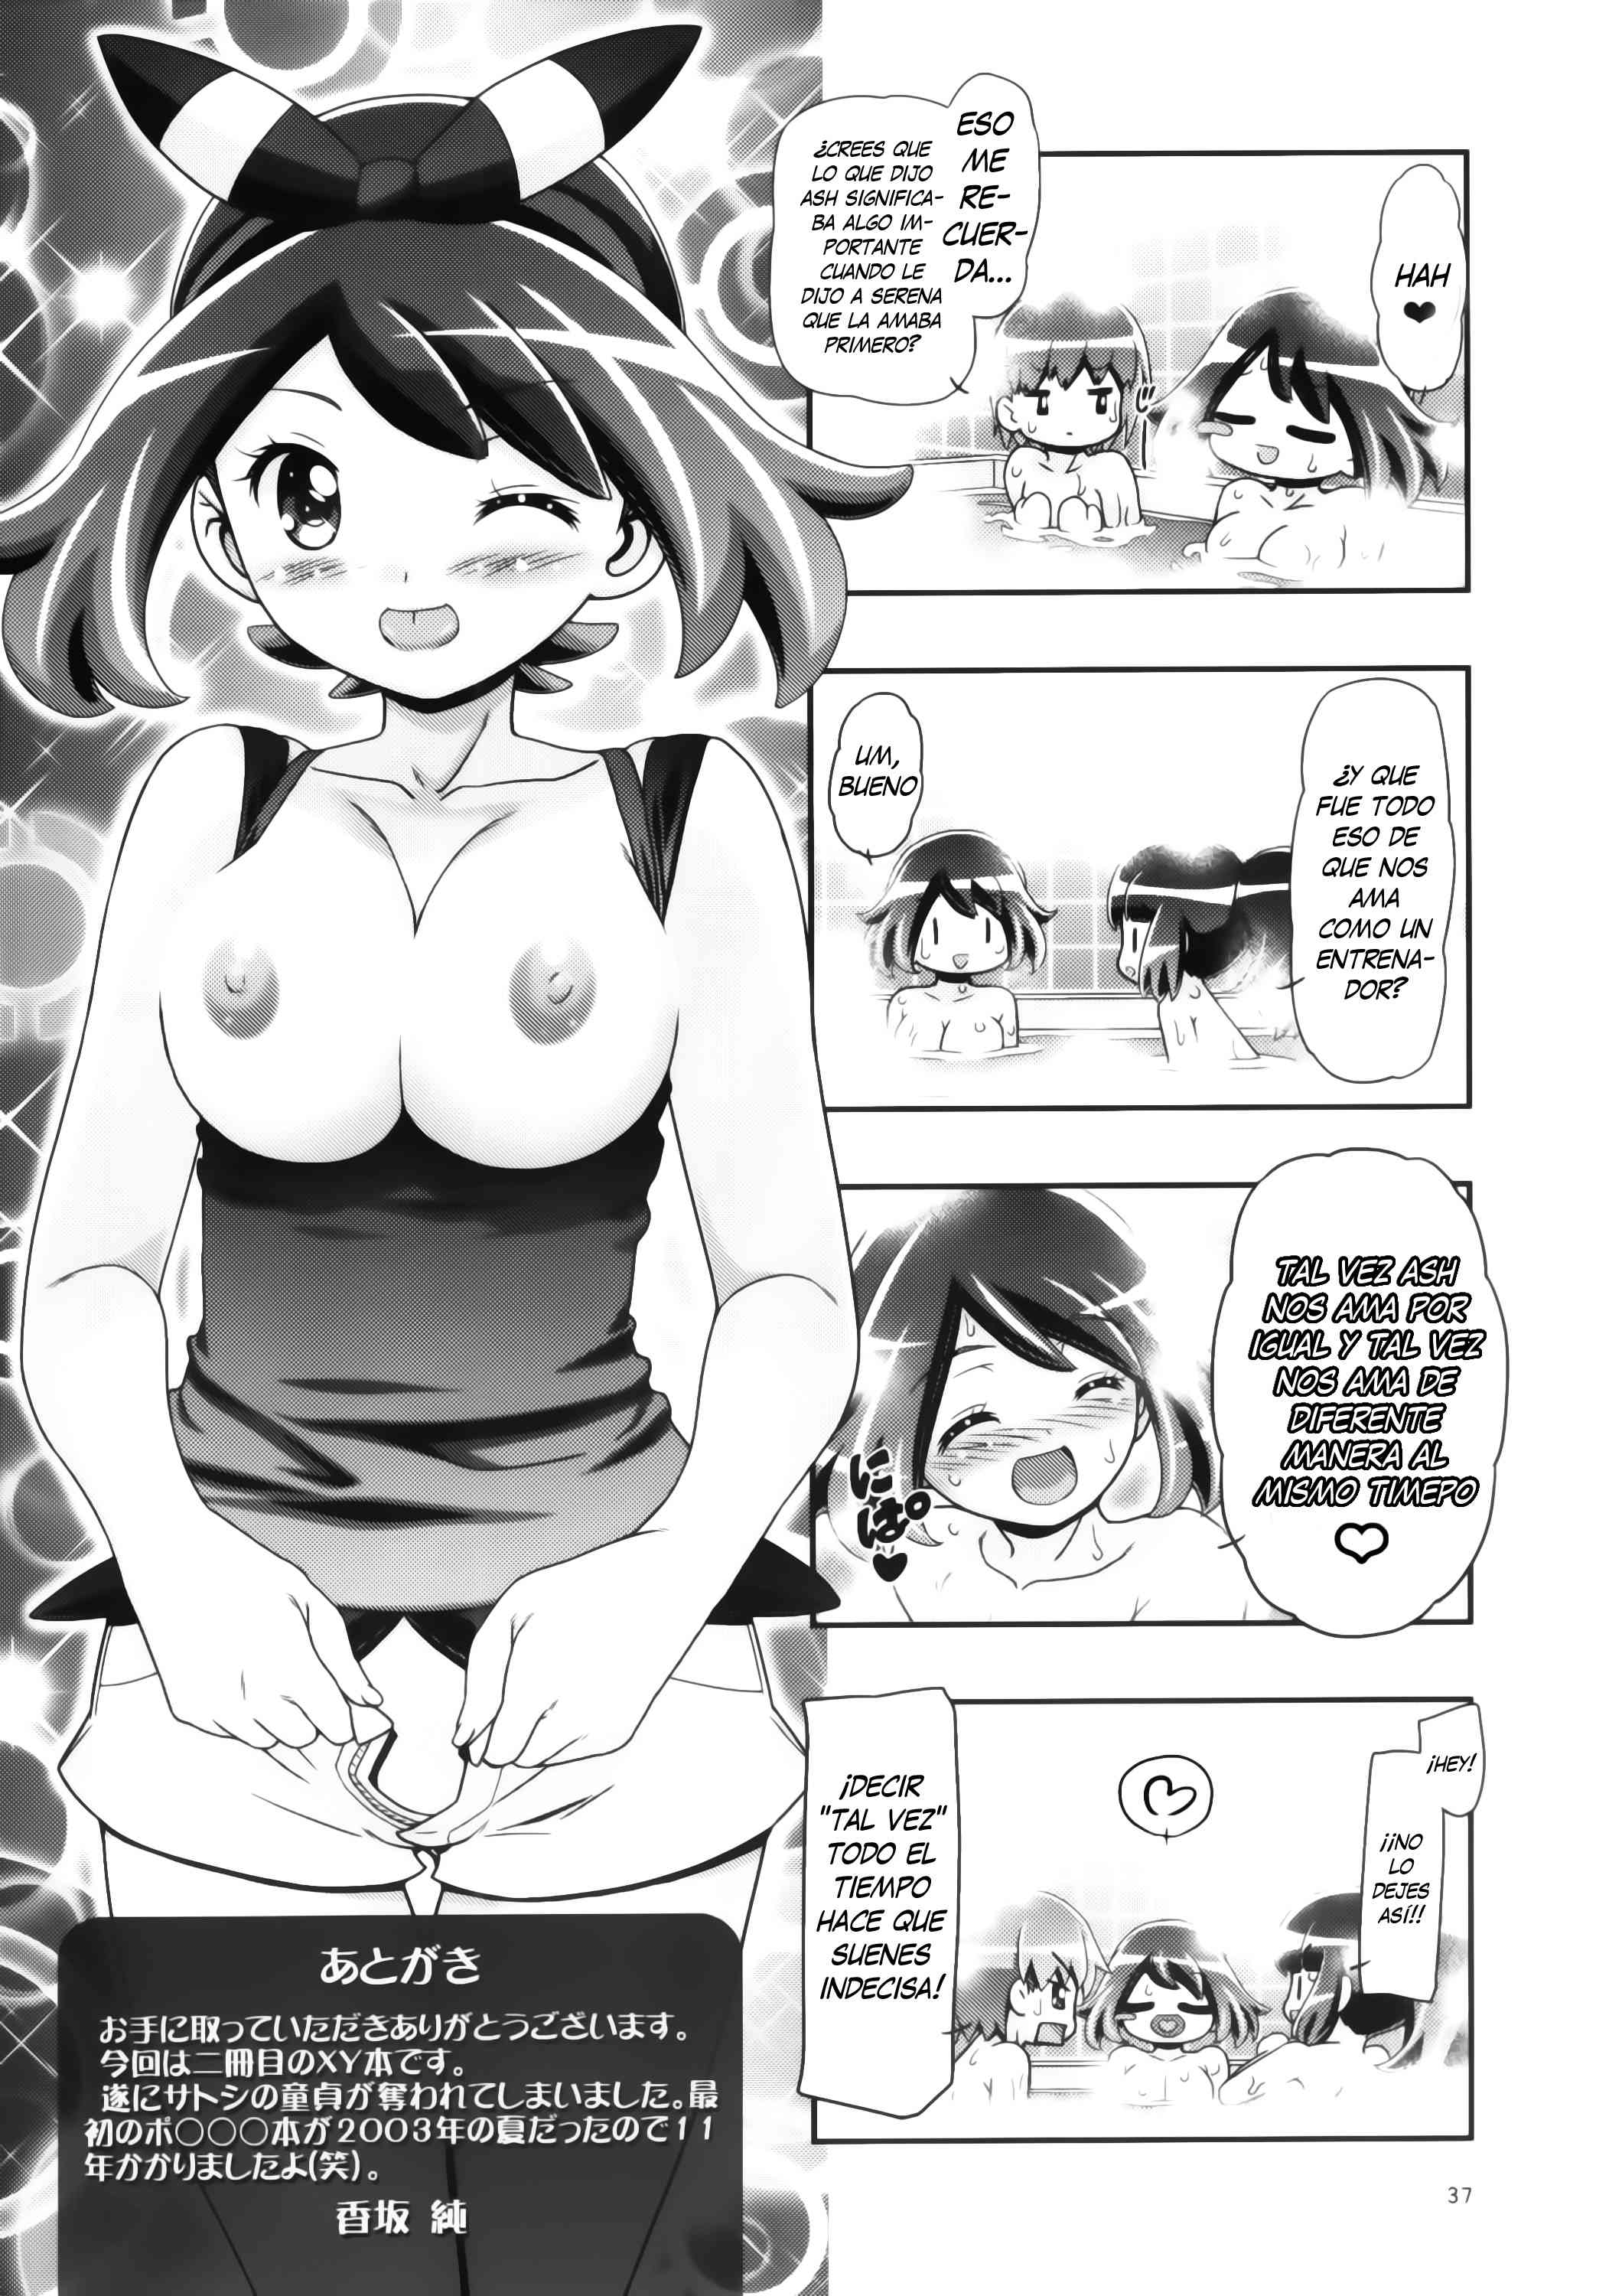 PM Gals XY 2 Chapter-2 - 33